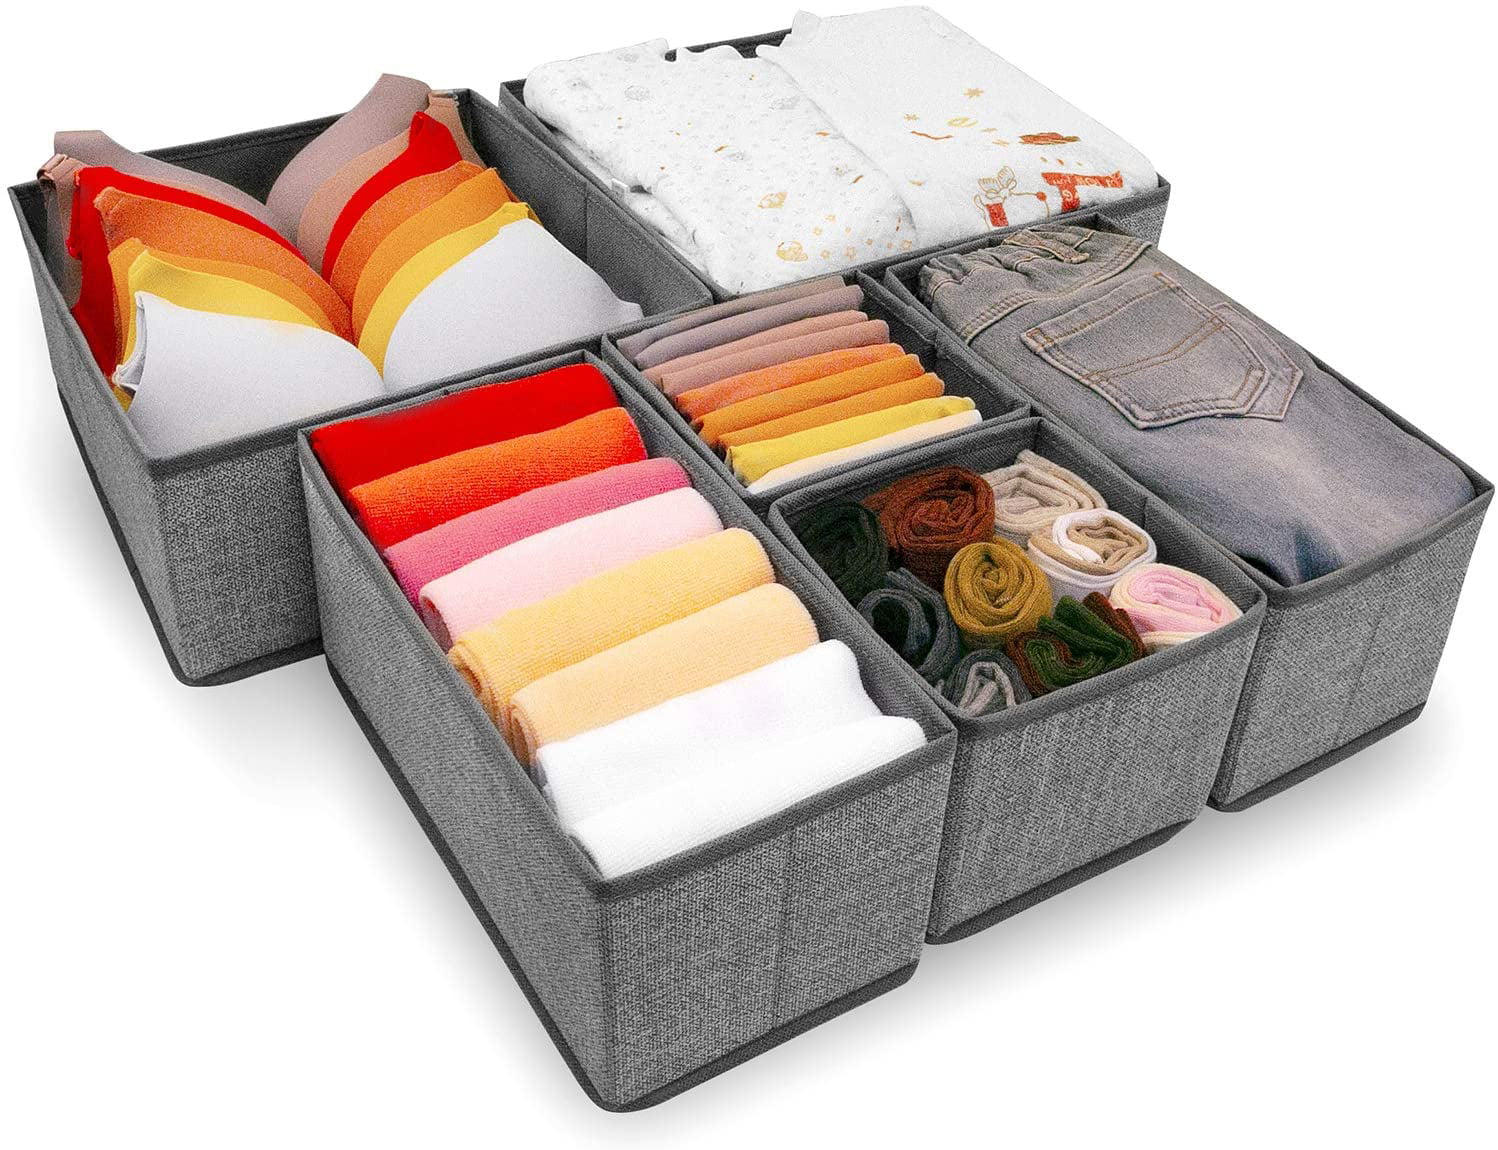 Non-Woven Fabric CASATOCA Drawer Organisers Underwear Organizer Set of 6 Dresser Dividers,Storage Boxes for Closet Grey Foldable Boxes for Socks and Underwear 